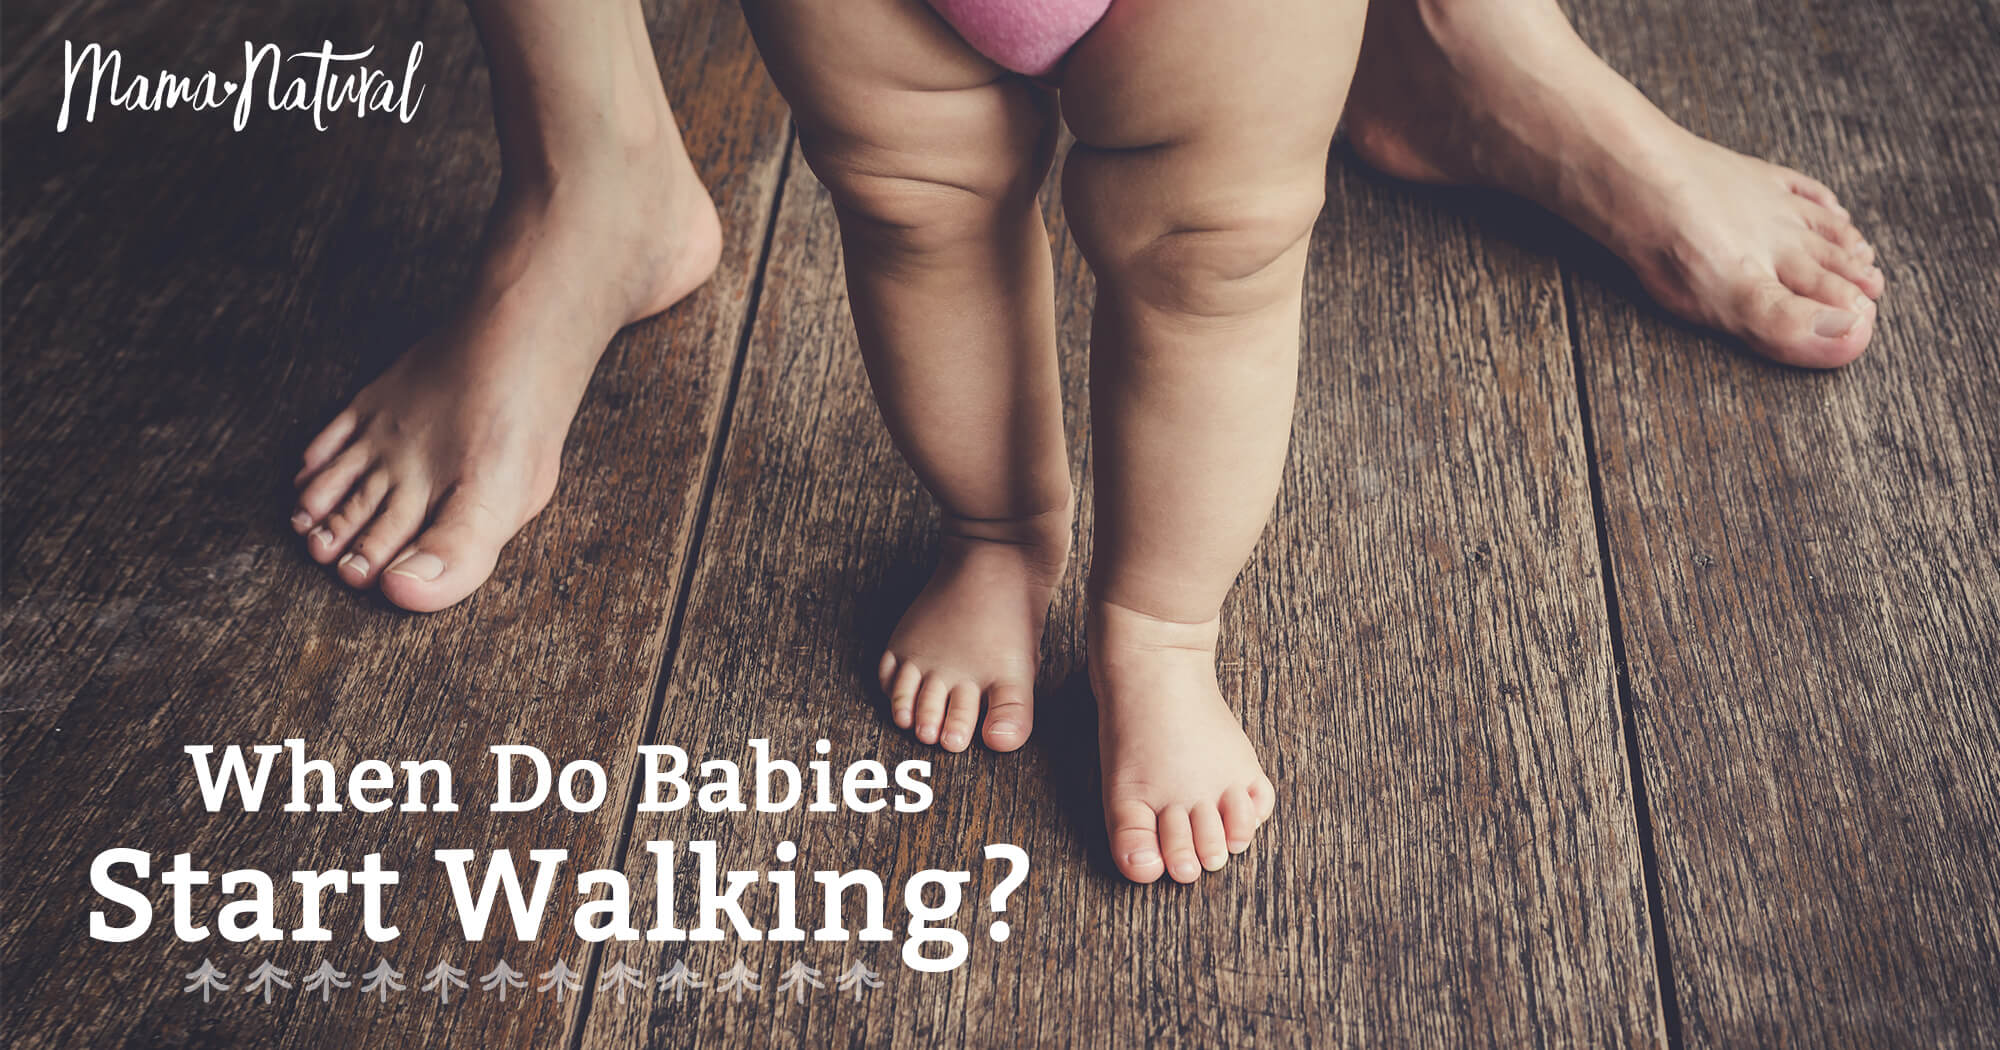 what age do babies start walking and talking